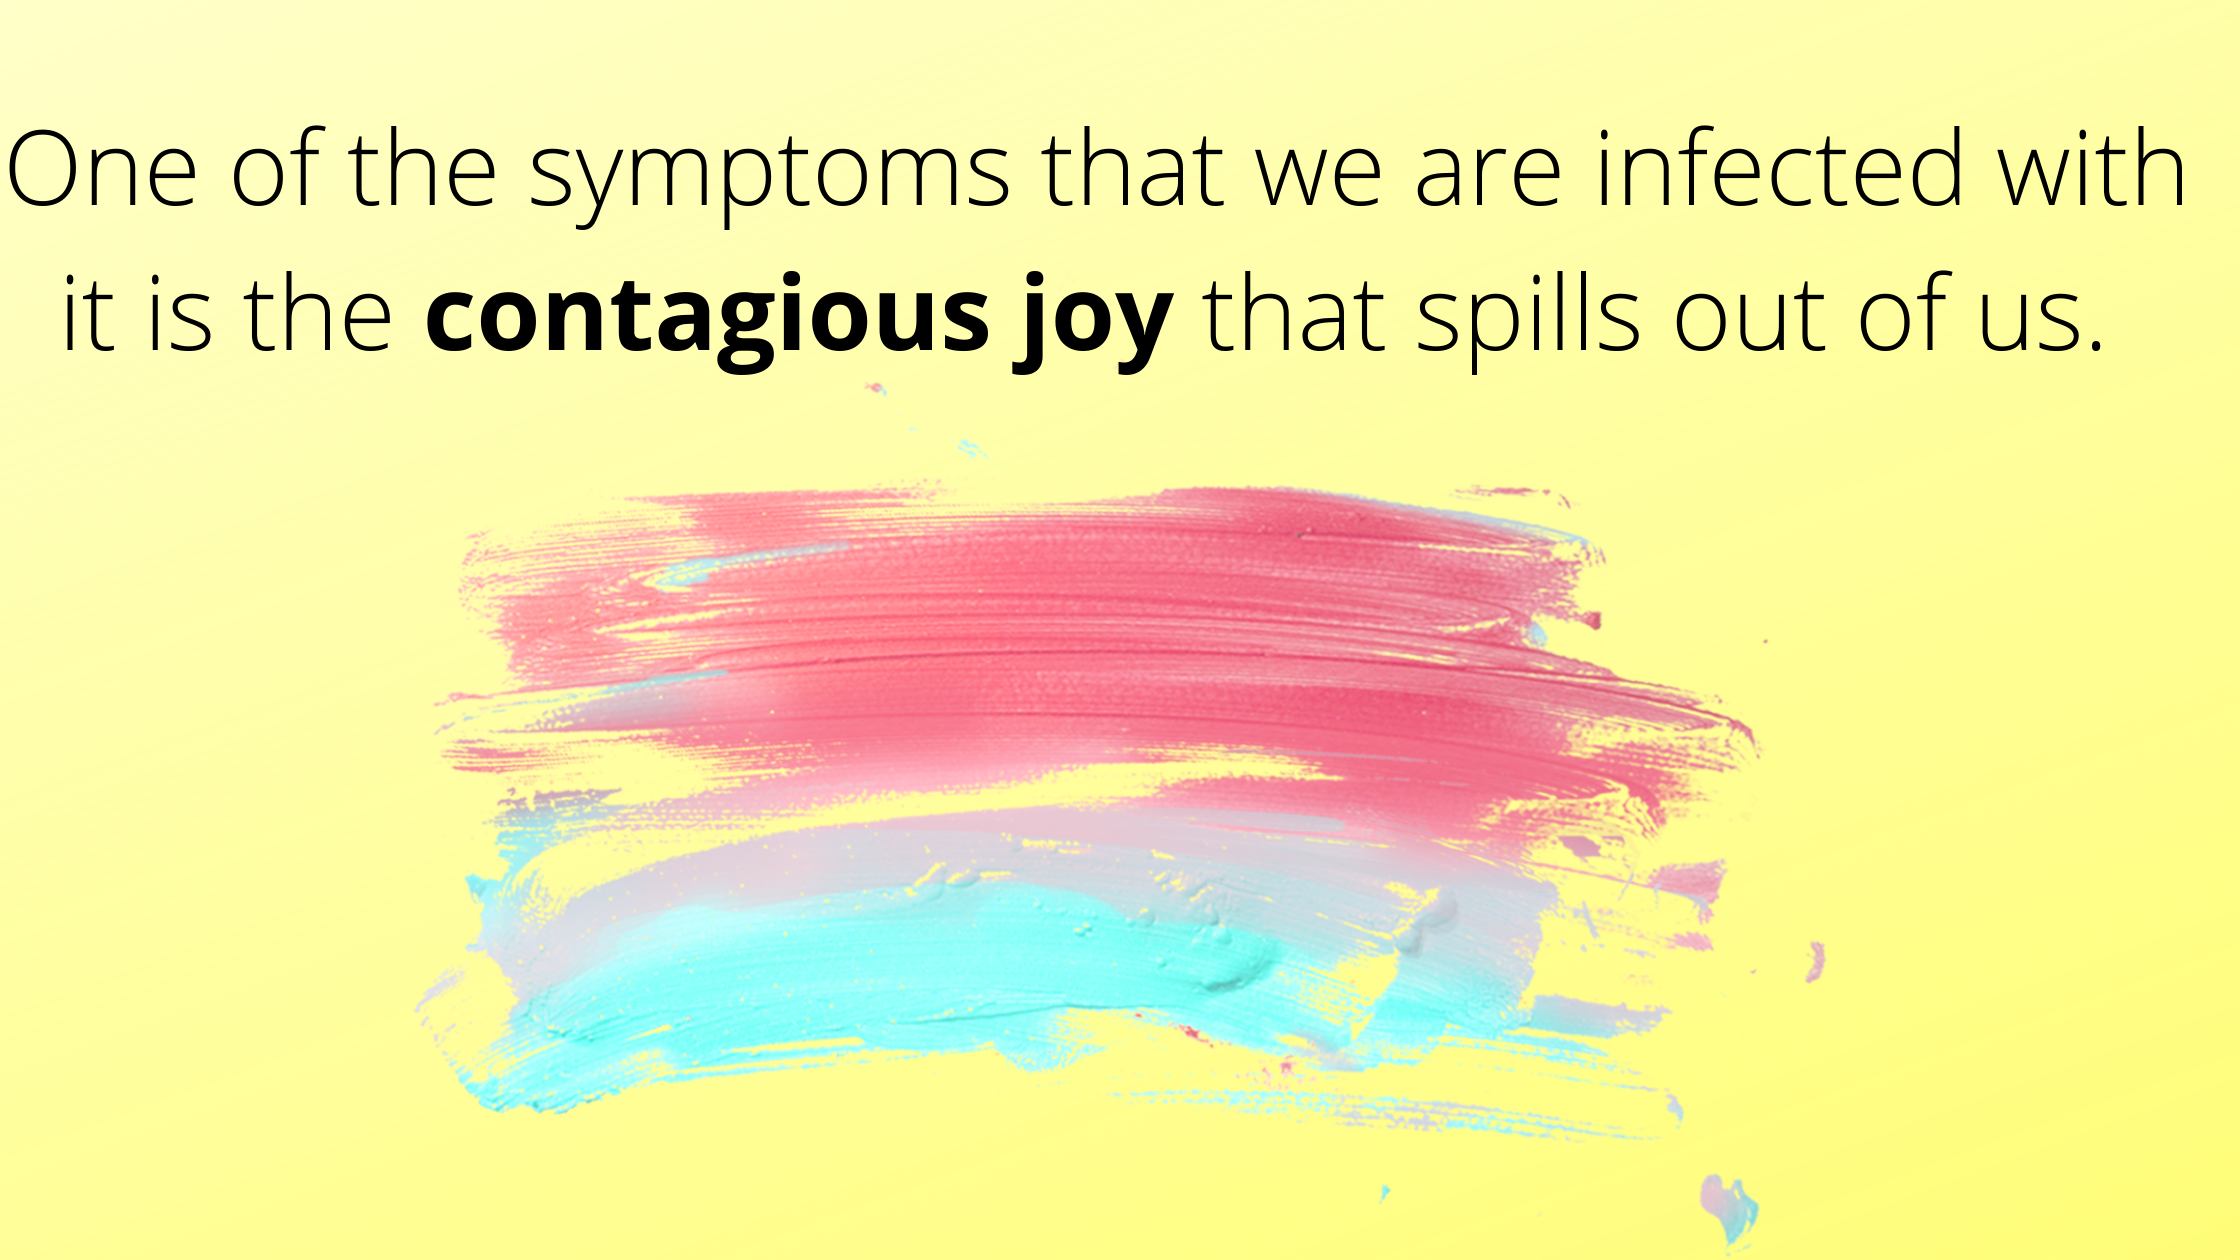 One of the symptoms that we are infected with it is the contagious joy that spills out of us.